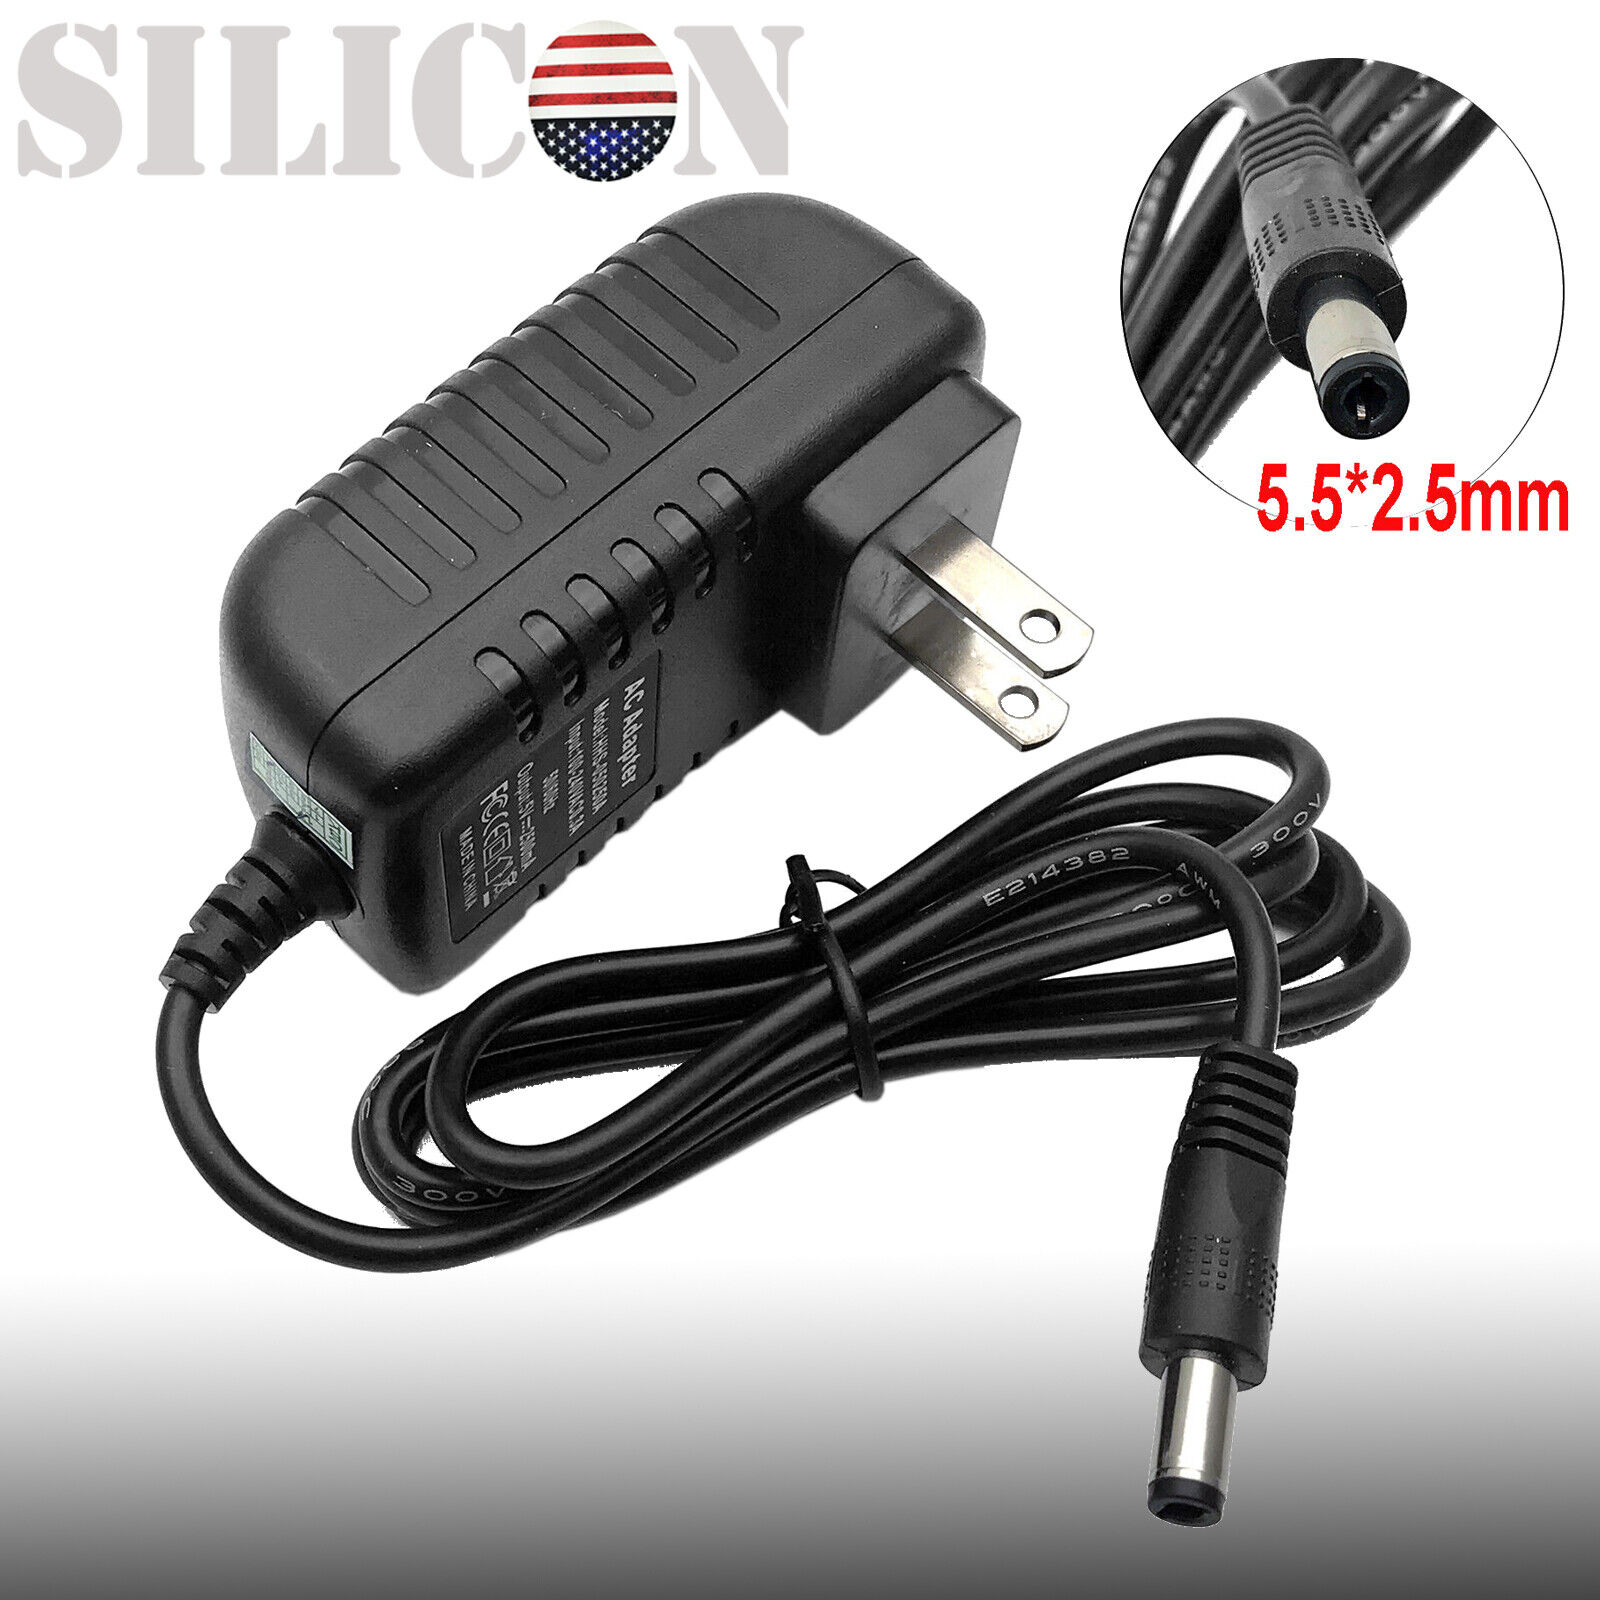 5V 2.5A AC/DC Adapter Charger Power Supply For D-Link DI-624 DI-704GU Router